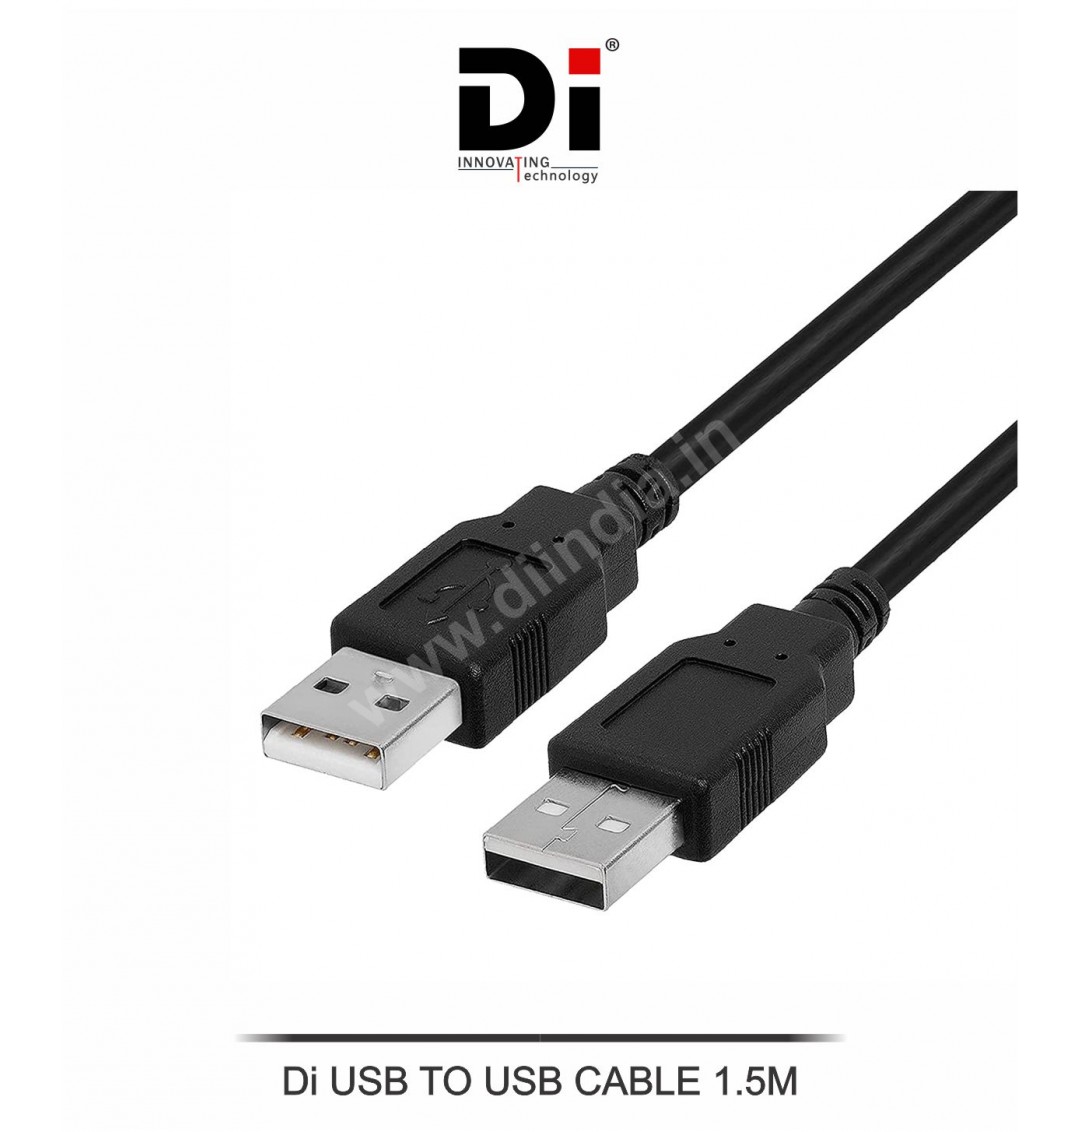 Di USB A TO USB A CABLE 1.5M (MALE TO MALE)